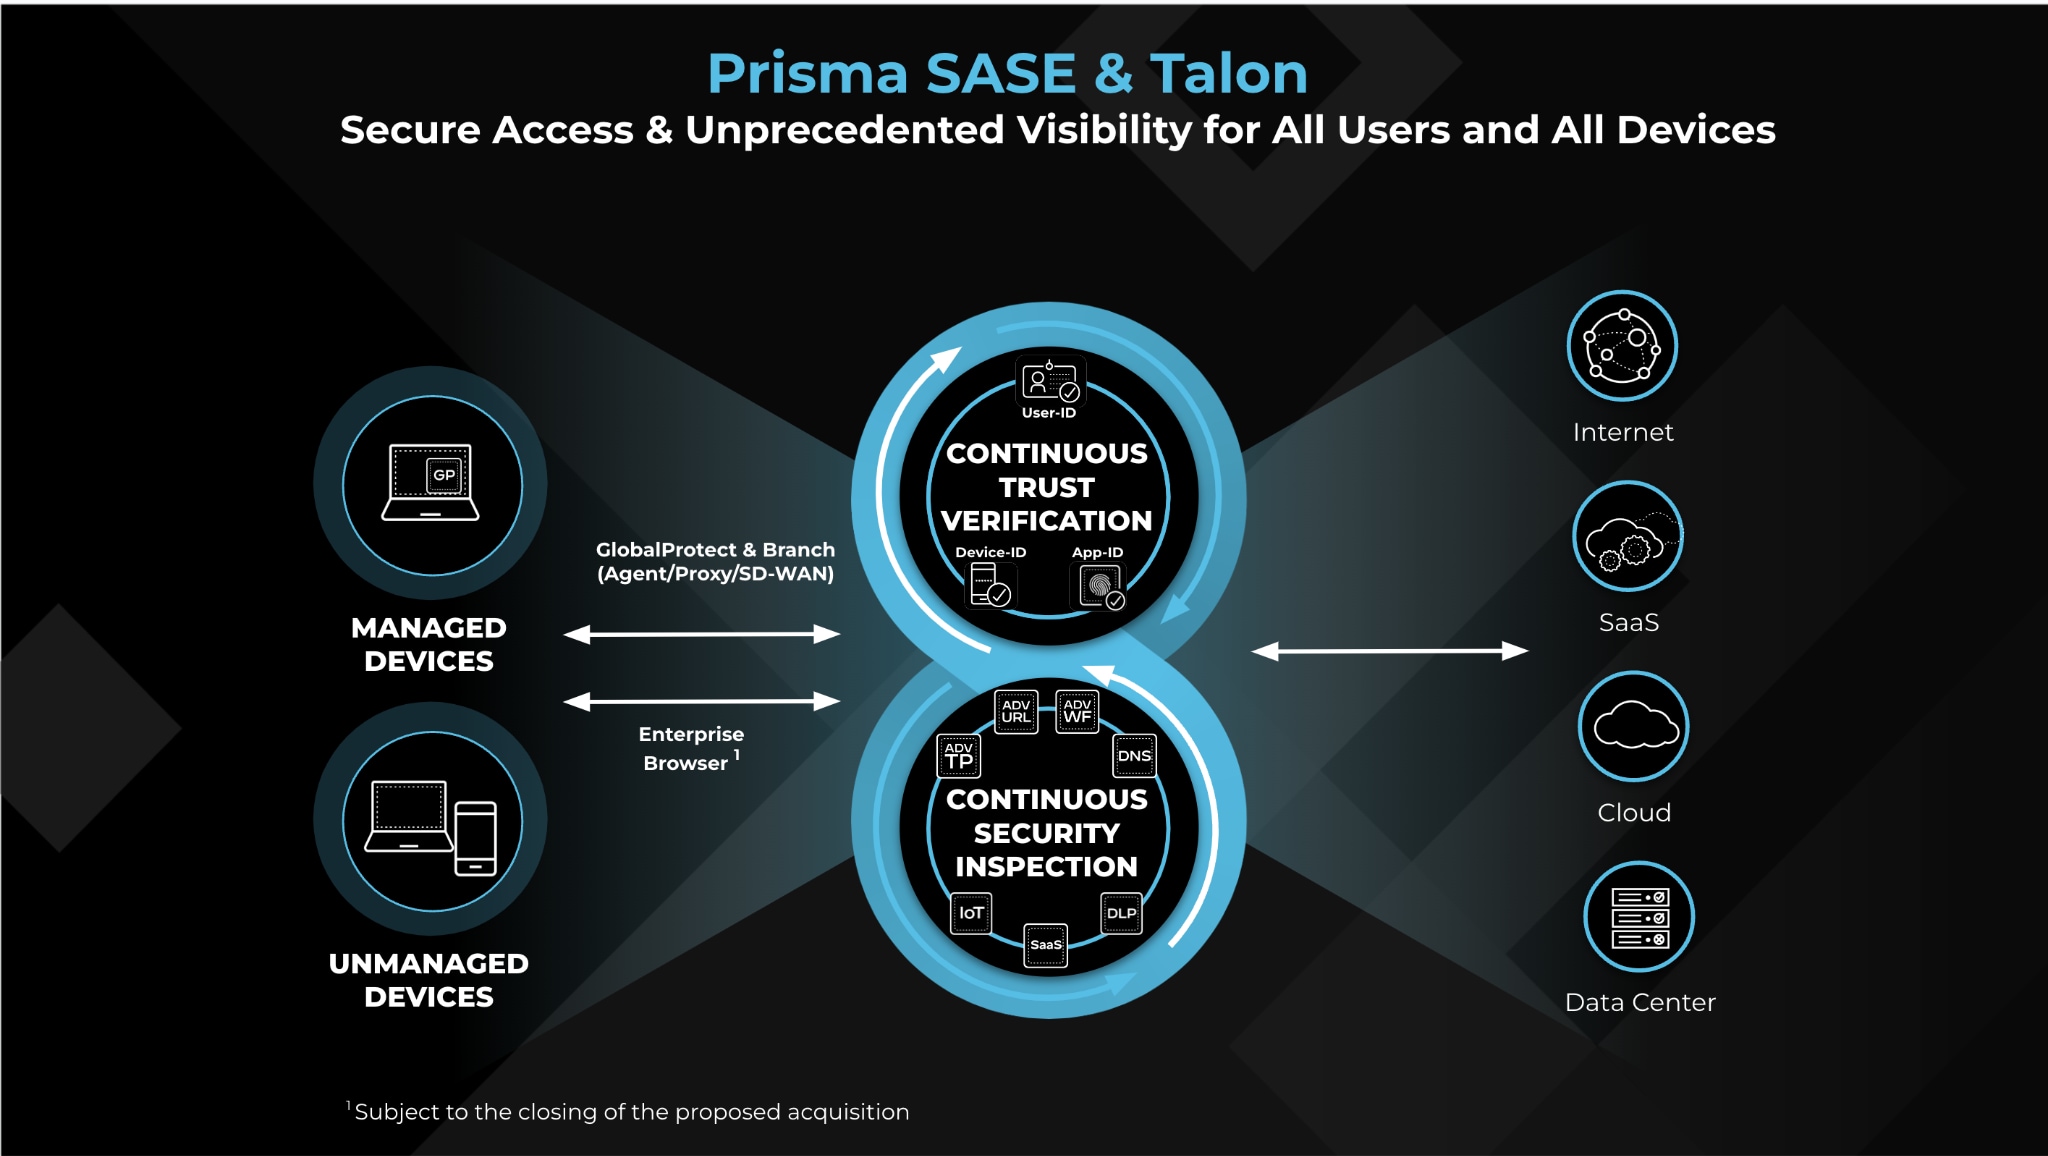 Chart showing how Prisma SASE and Talon secure access and unprecedented visibility for all users and all devices.